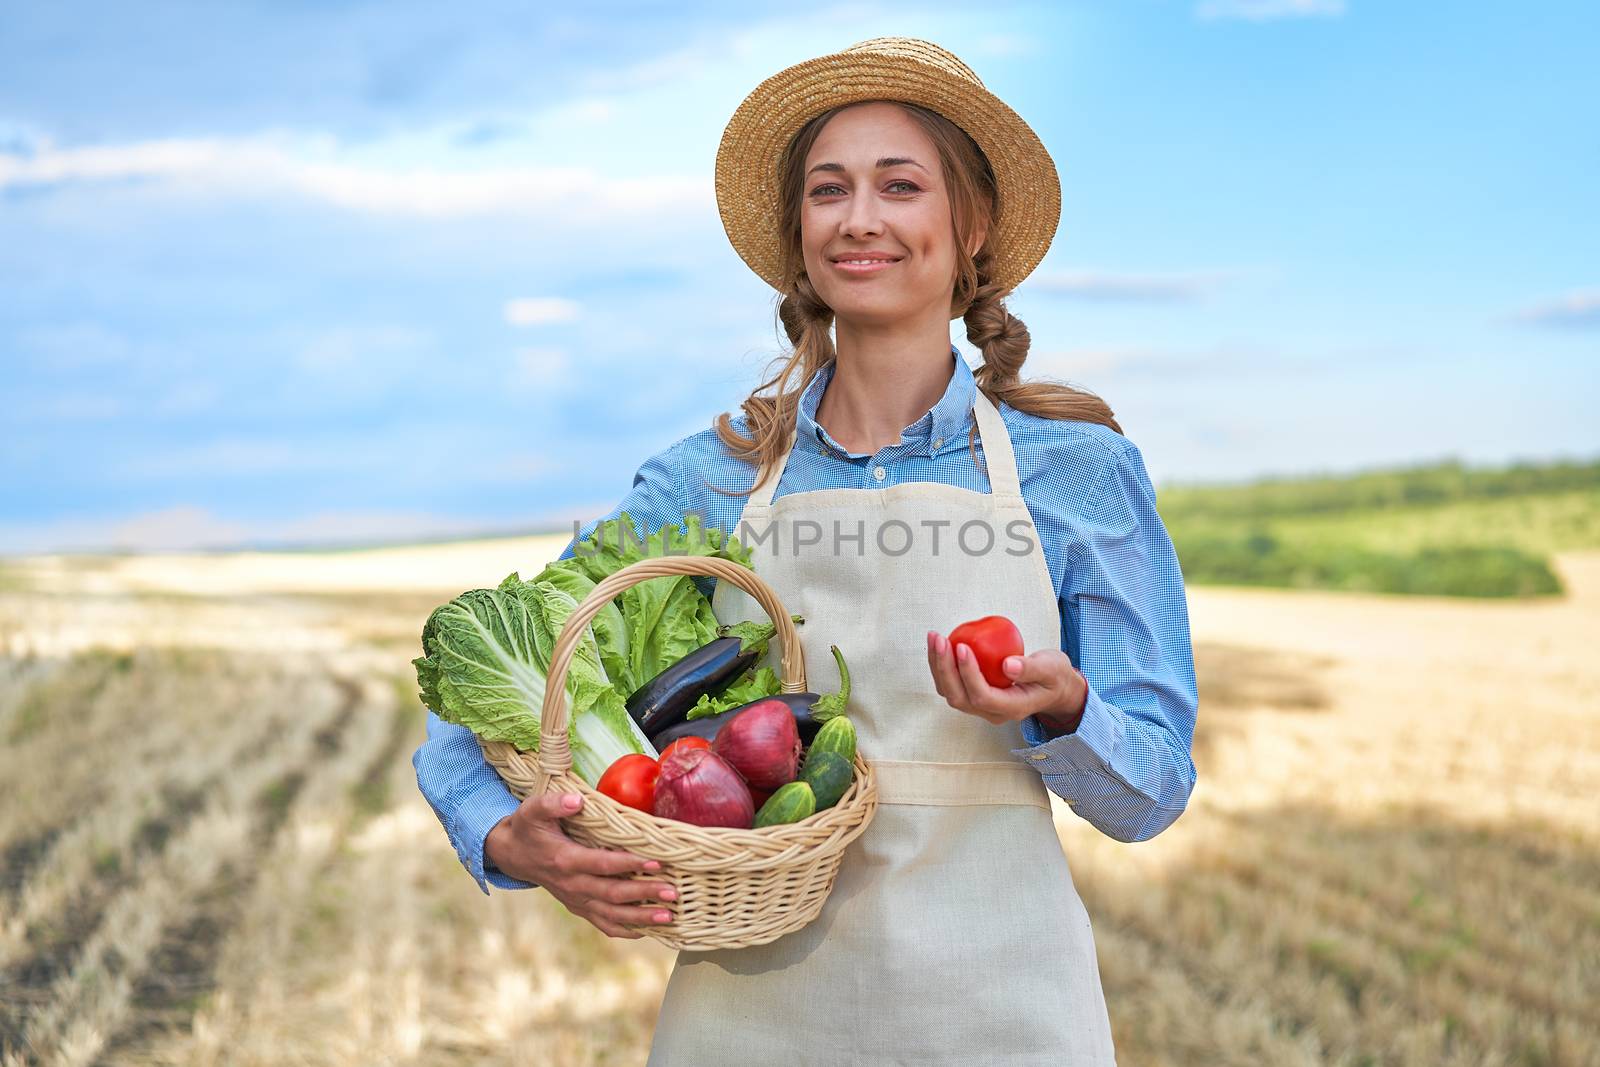 Woman farmer straw hat holding basket vegetable onion tomato salad cucumber standing farmland smiling Female agronomist specialist farming agribusiness Happy Girl dressed apron cultivated wheat field